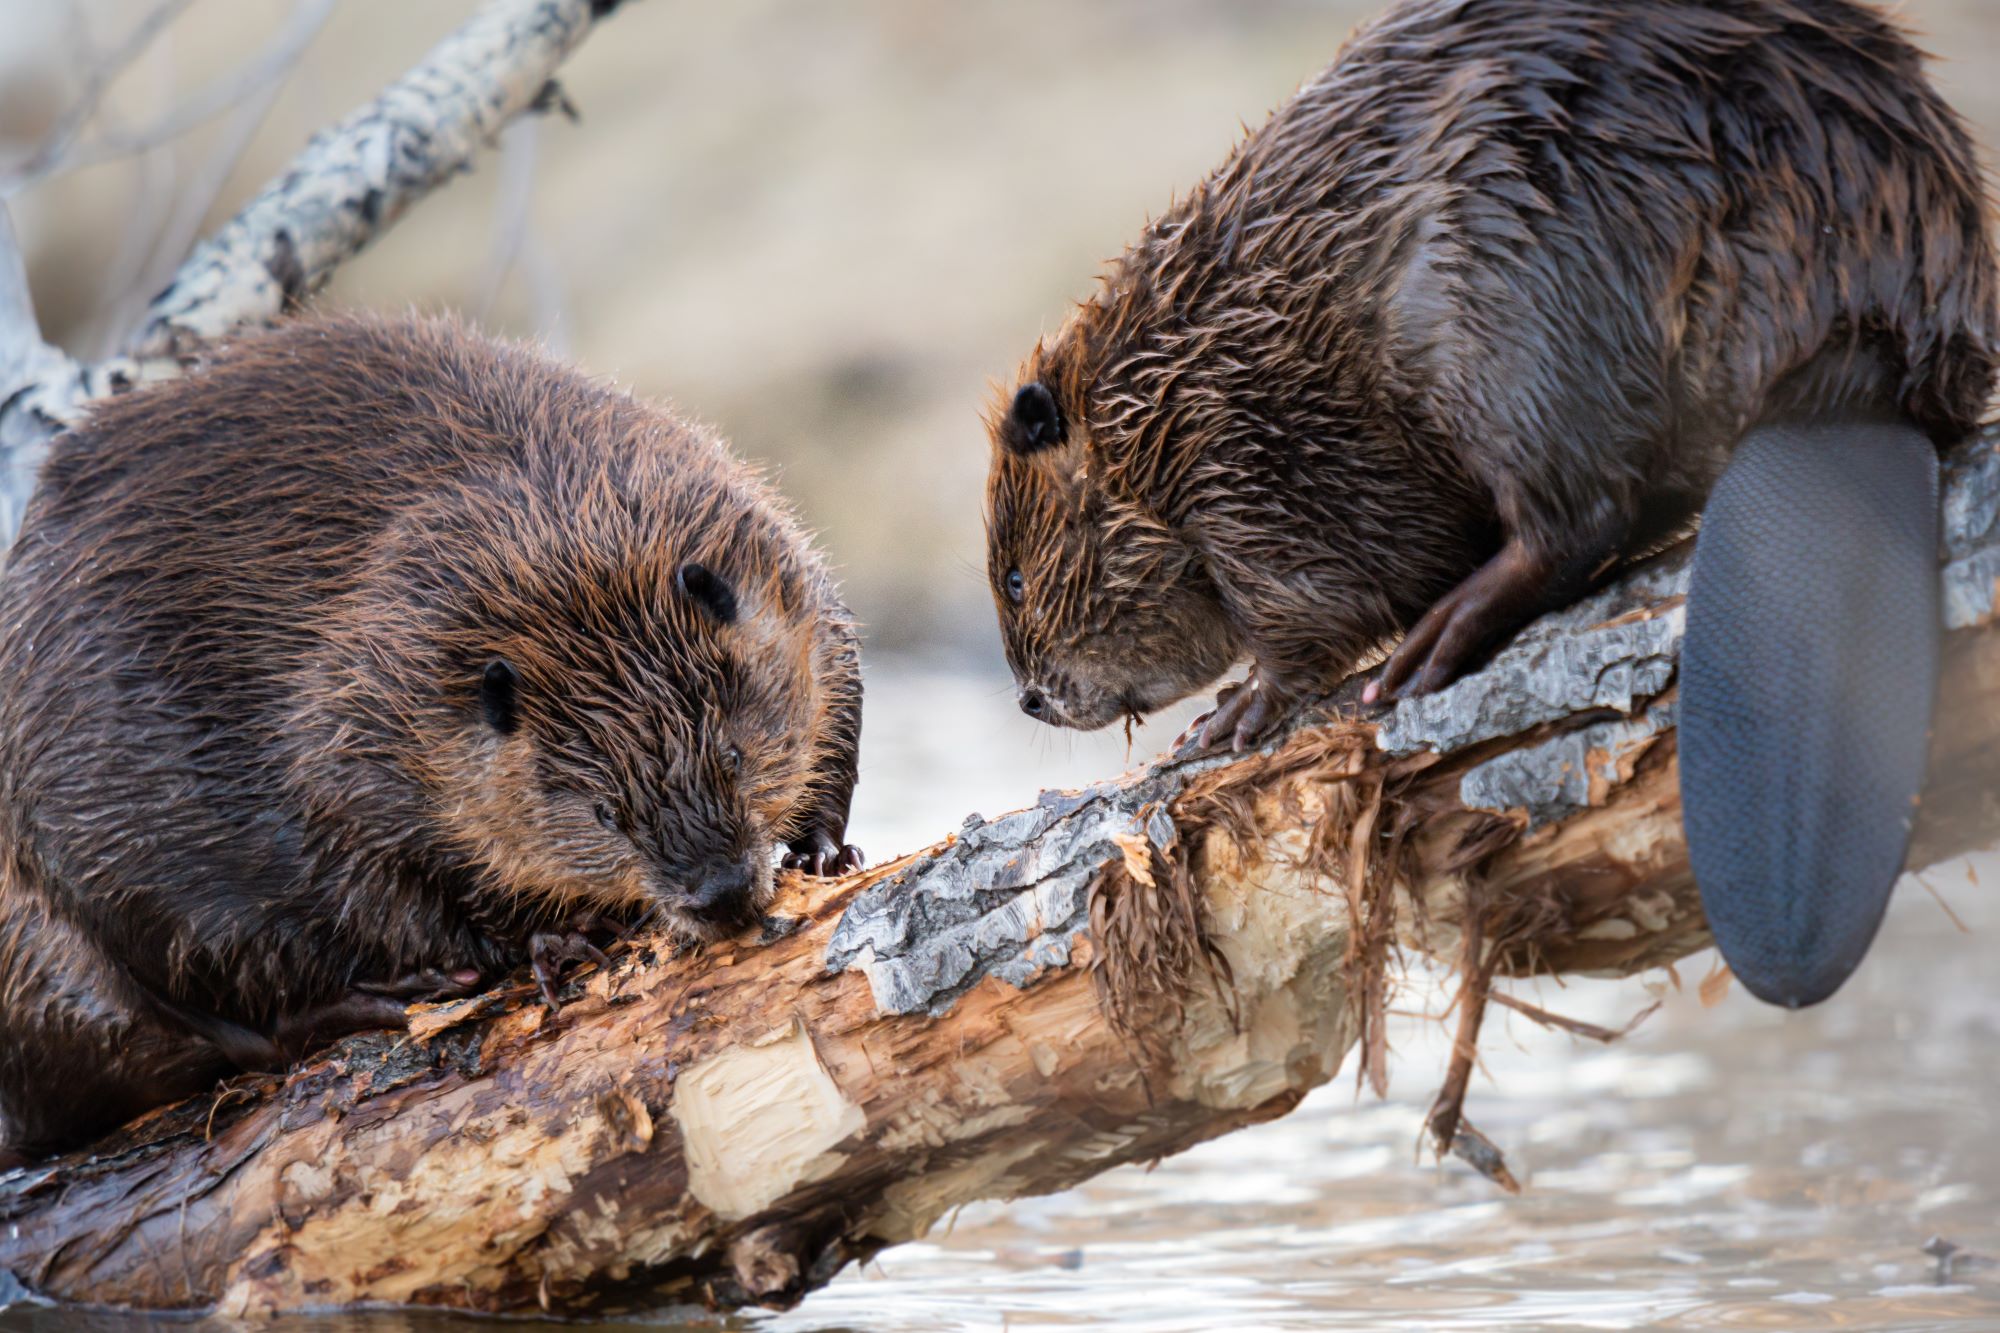 Beavers chewing on a log.